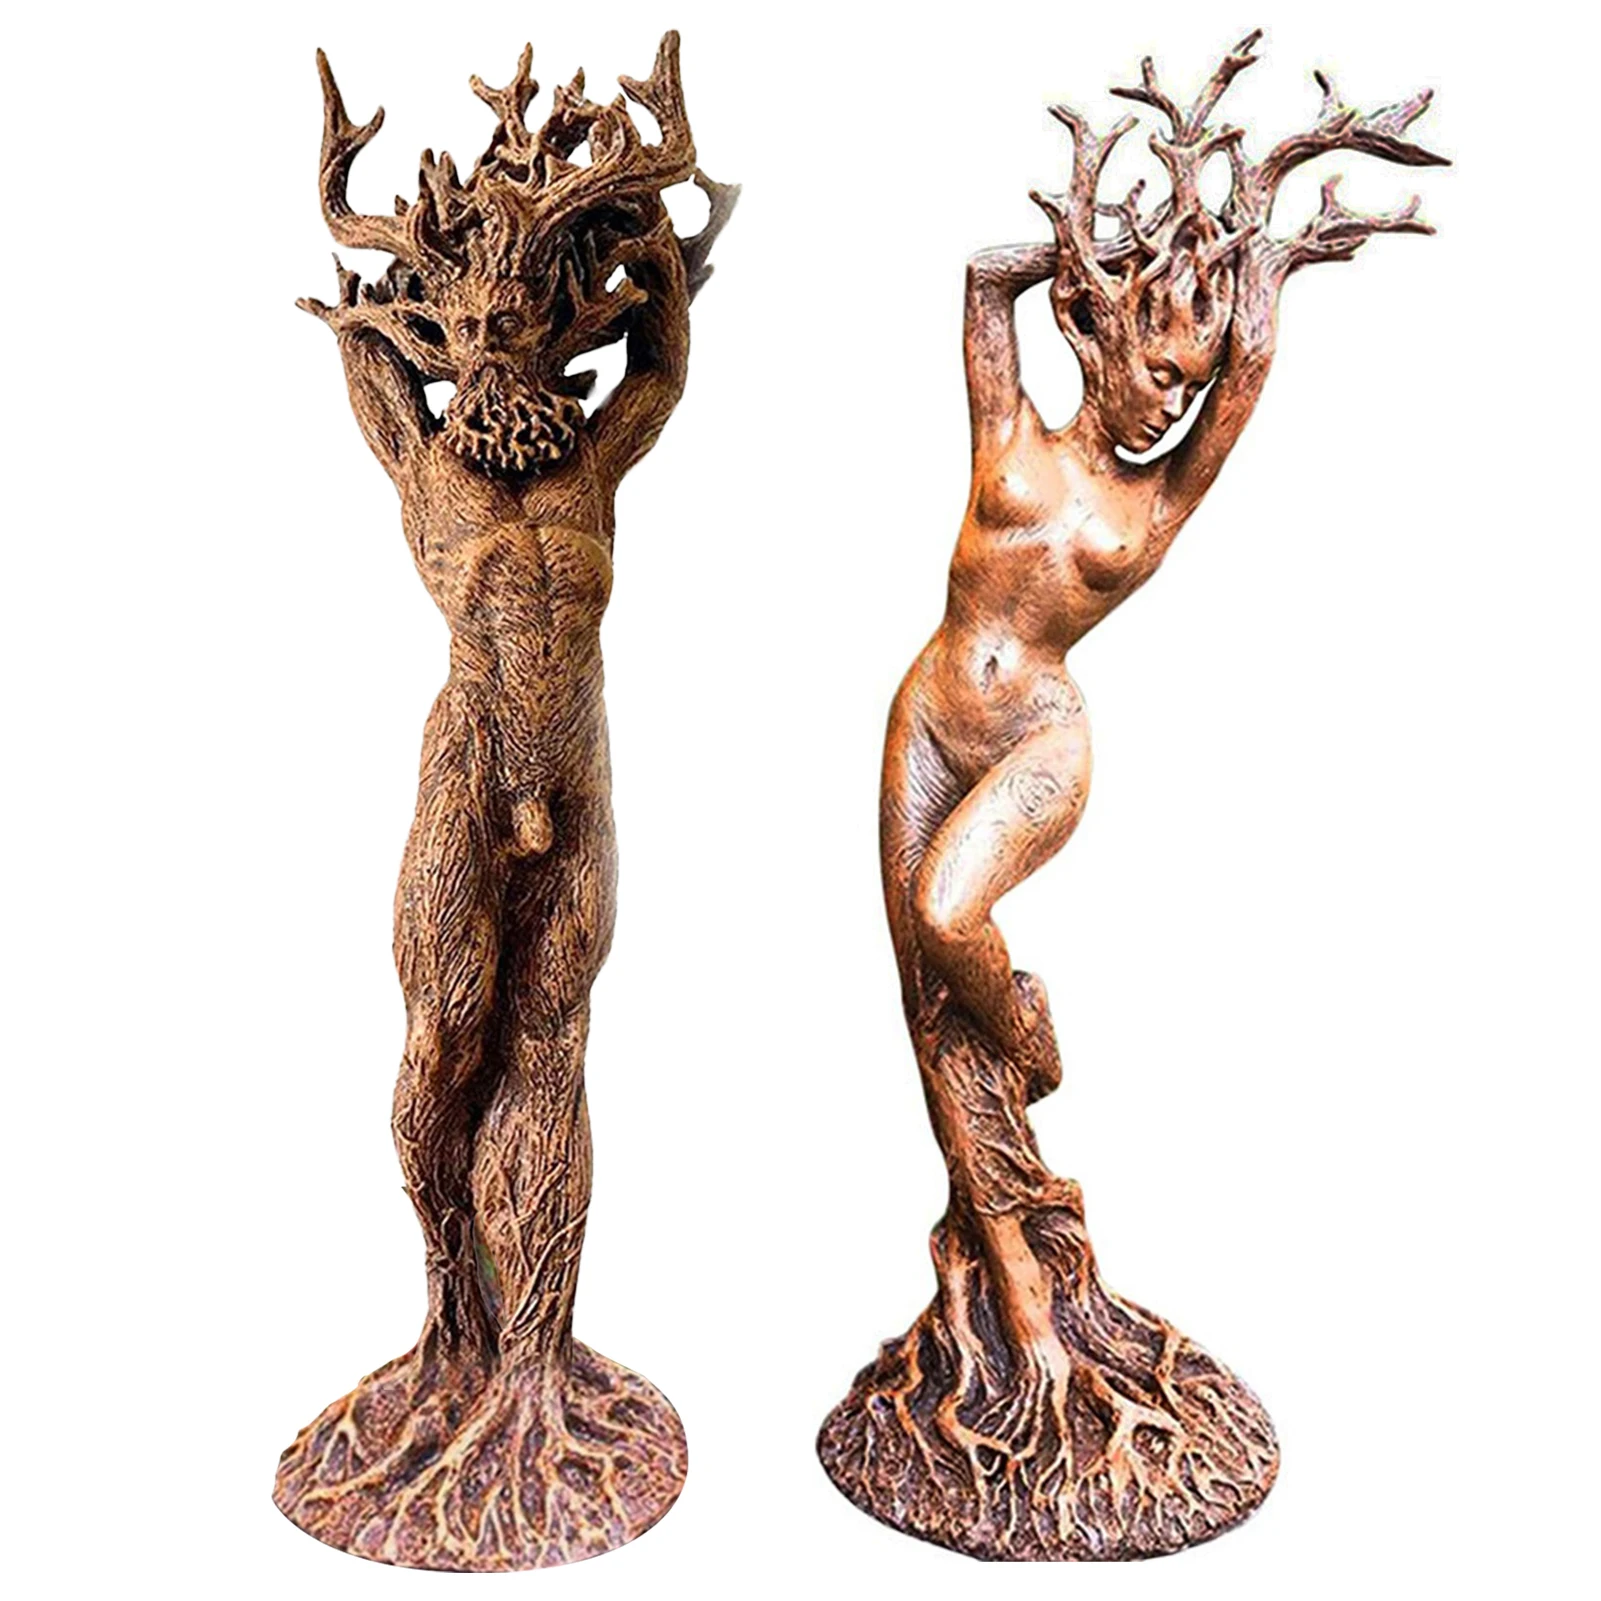 

NEW 2021 Highly Detailed Sculpture God Or Goddess Of Tree Statue Resin Figurine Garden Sculpture For Homes, Offices Or Gardens